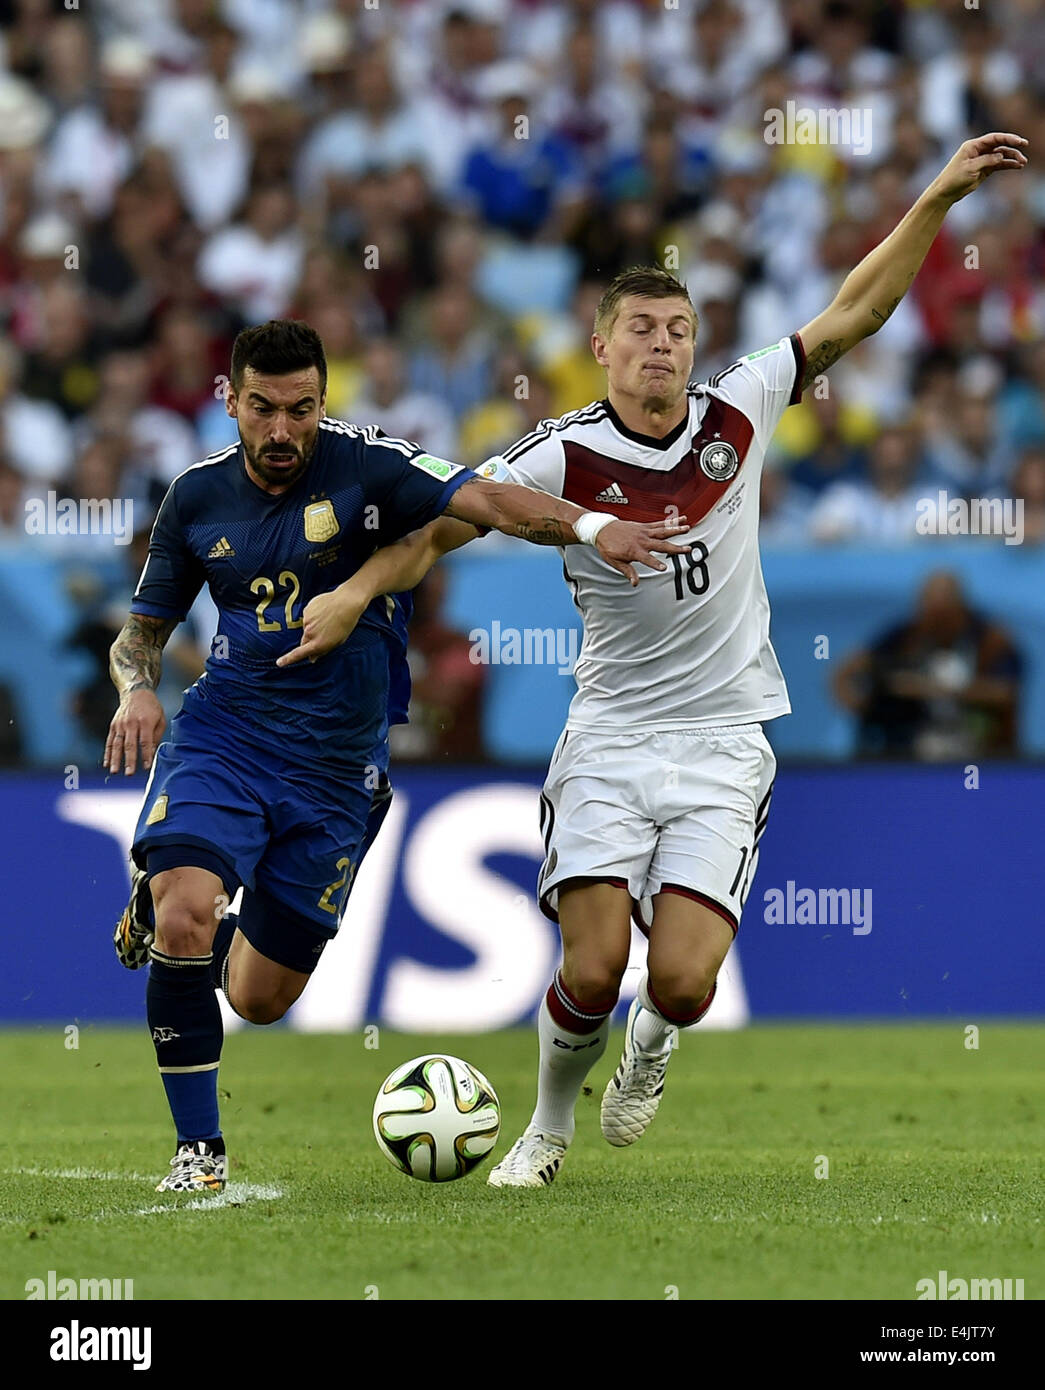 Rio De Janeiro, Brazil. 13th July, 2014. Germany's Toni Kroos (R) vies with Argentina's Ezequiel Lavezzi during the final match between Germany and Argentina of 2014 FIFA World Cup at the Estadio do Maracana Stadium in Rio de Janeiro, Brazil, on July 13, 2014. Credit:  Qi Heng/Xinhua/Alamy Live News Stock Photo